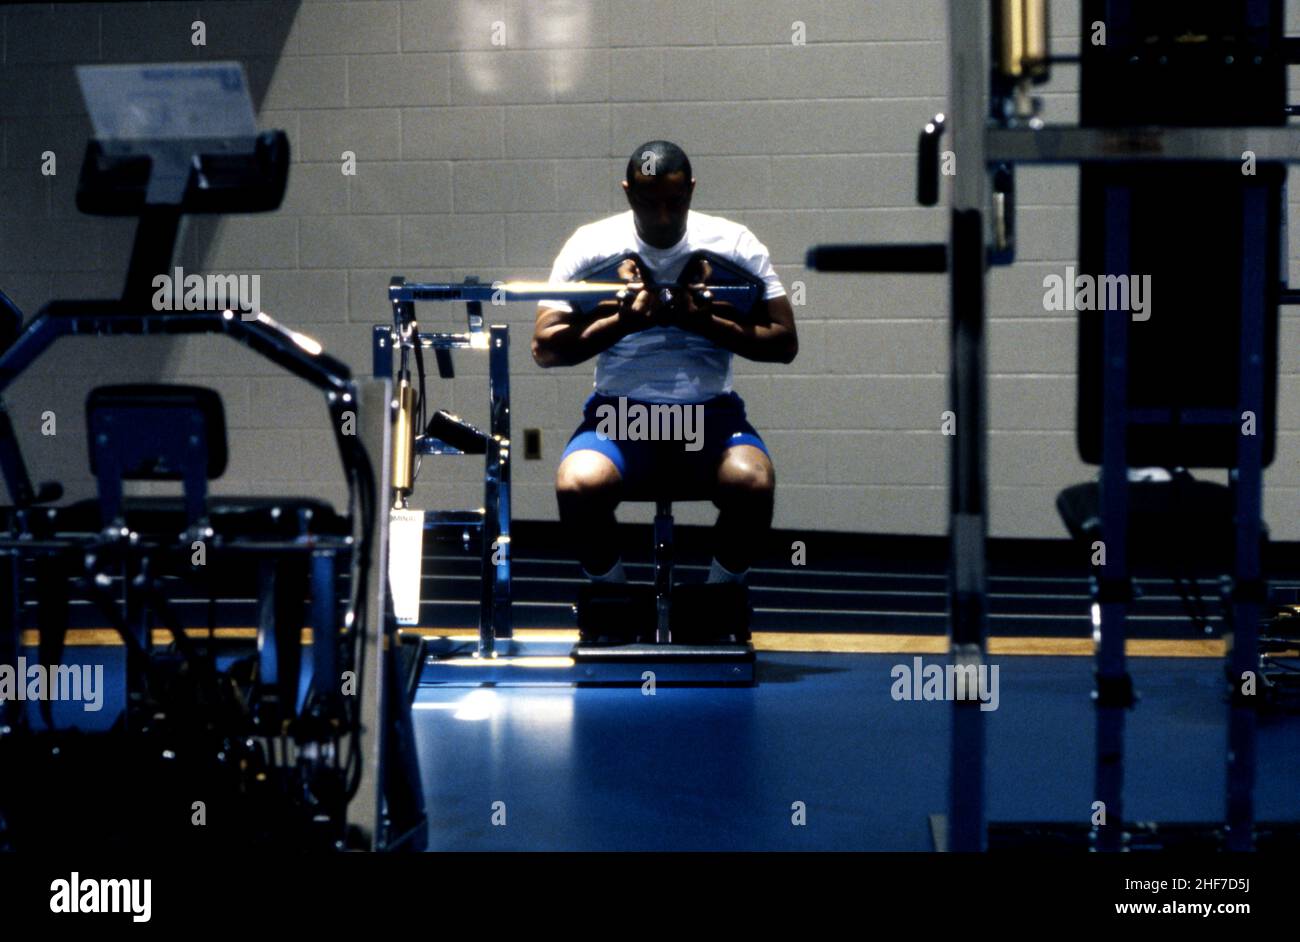 African American man doing workout in a gym on exercise equipment Stock Photo